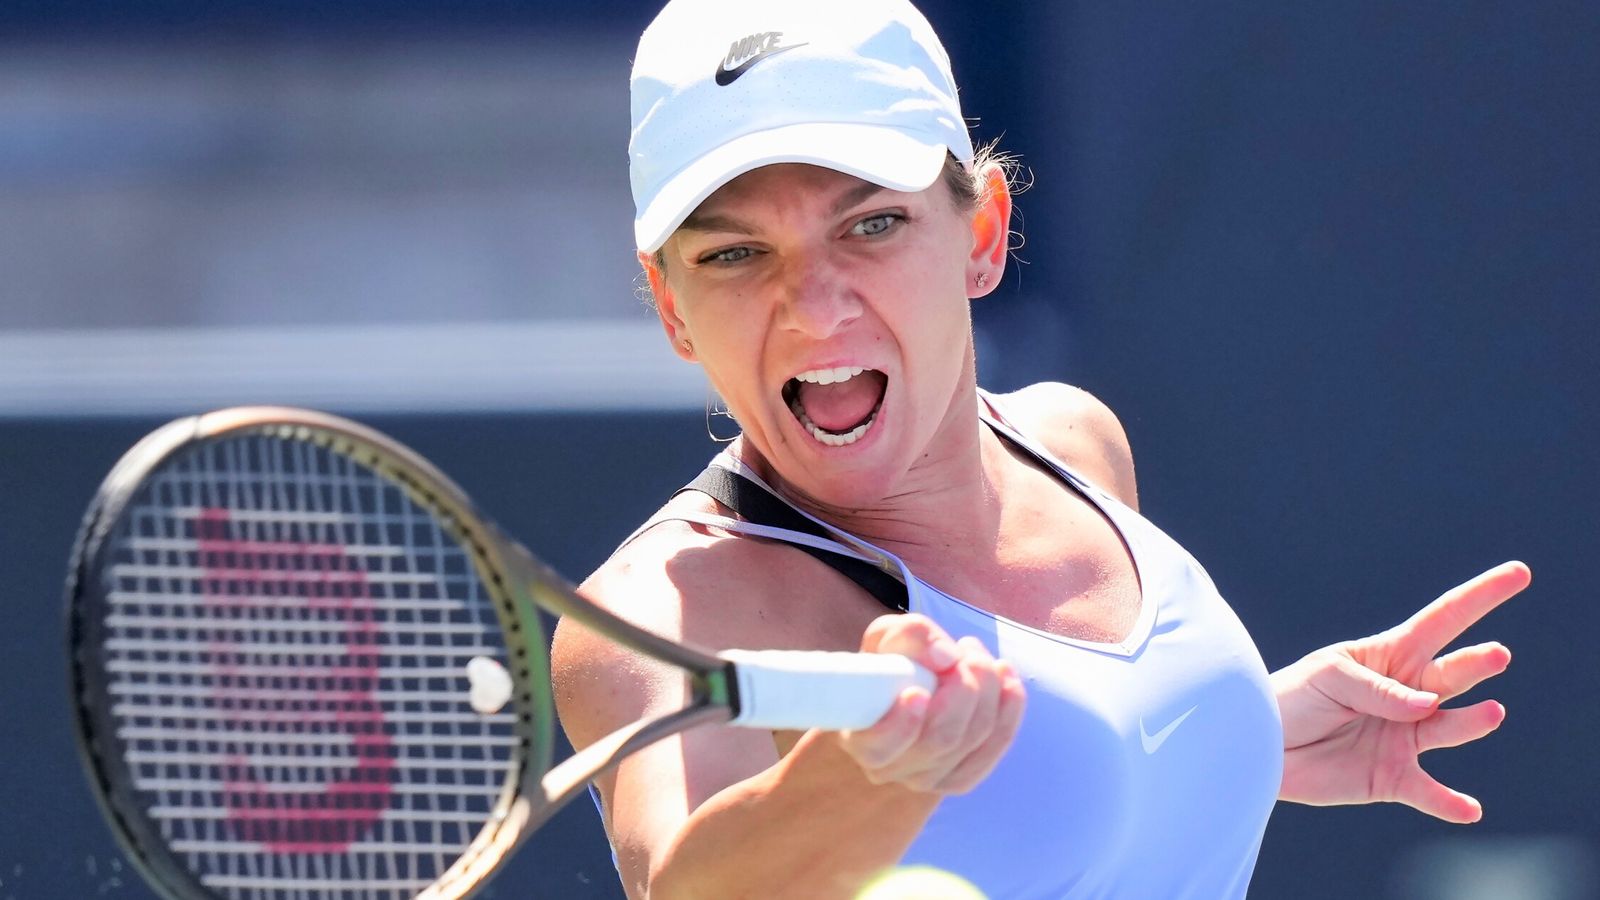 Simona Halep Deals With Four Year Suspension Following Tennis Anti-Doping Violations